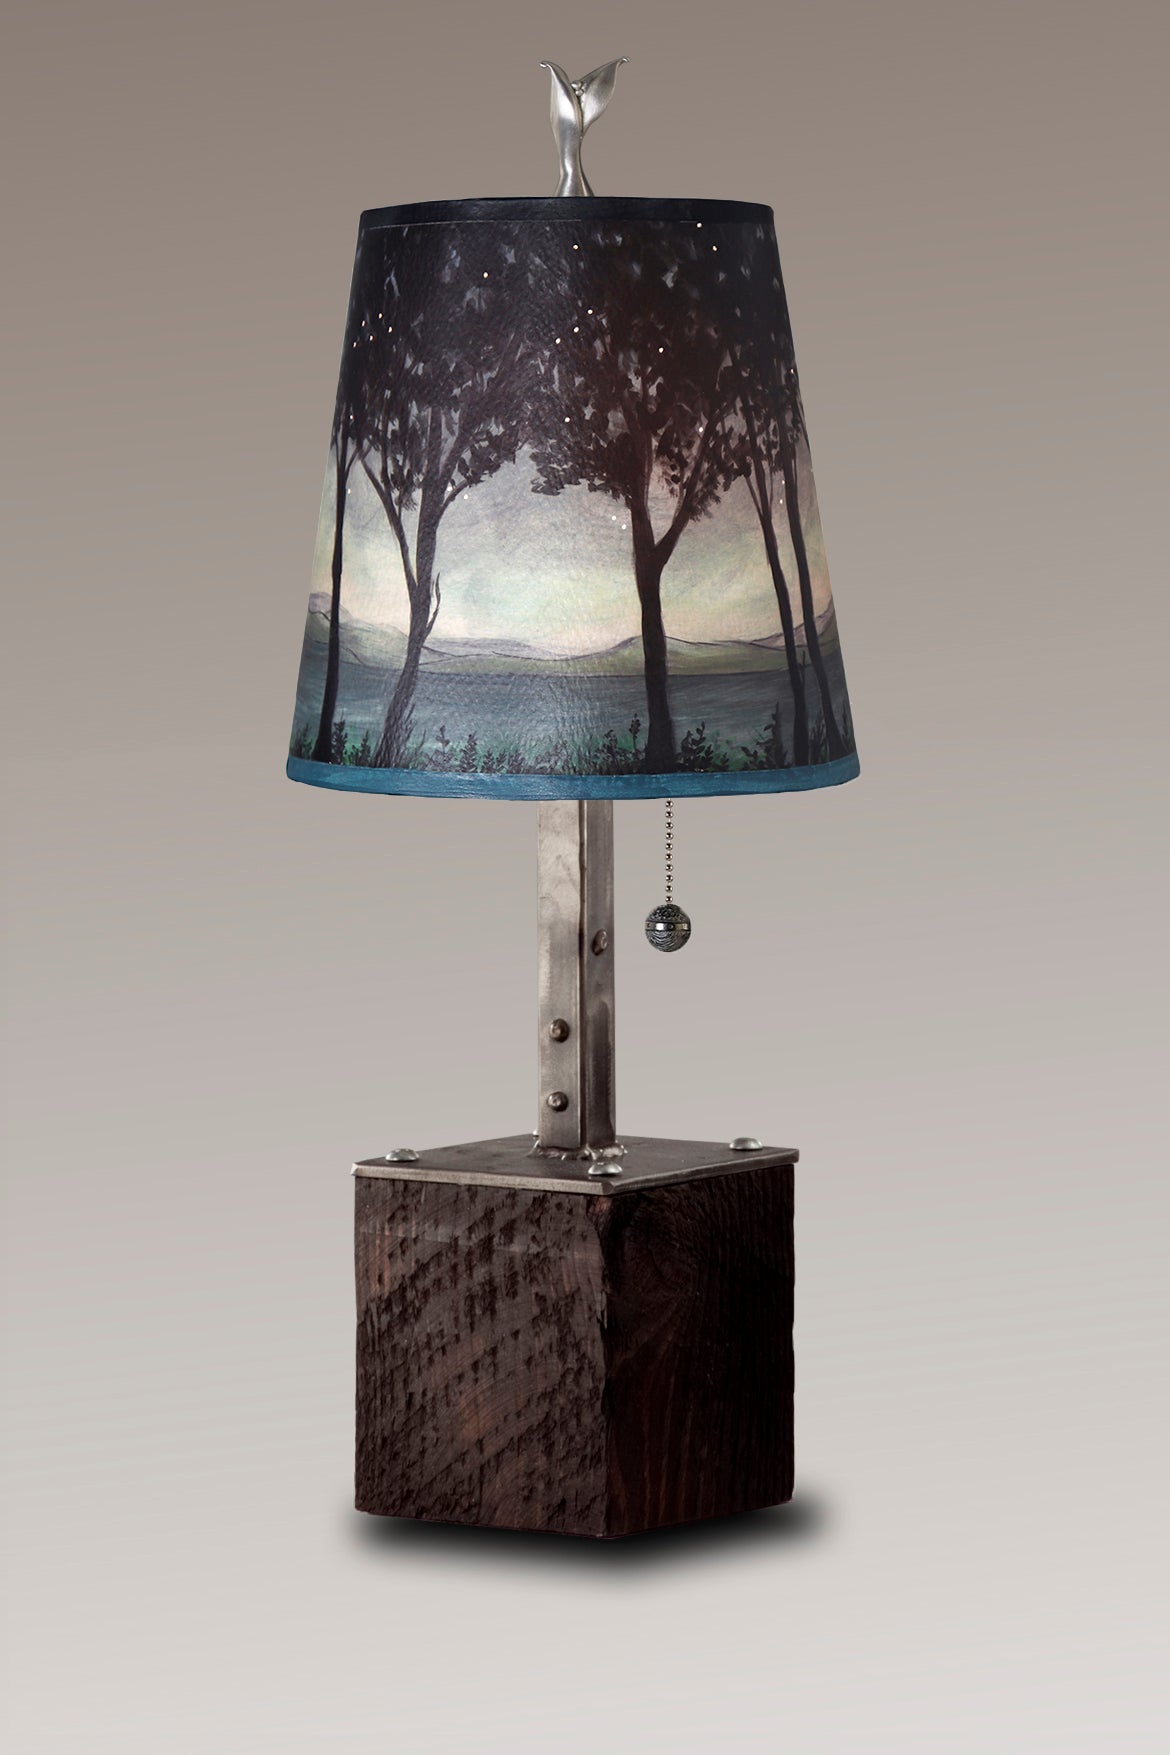 Janna Ugone &amp; Co Table Lamps Steel Table Lamp on Reclaimed Wood with Small Drum Shade in Twilight